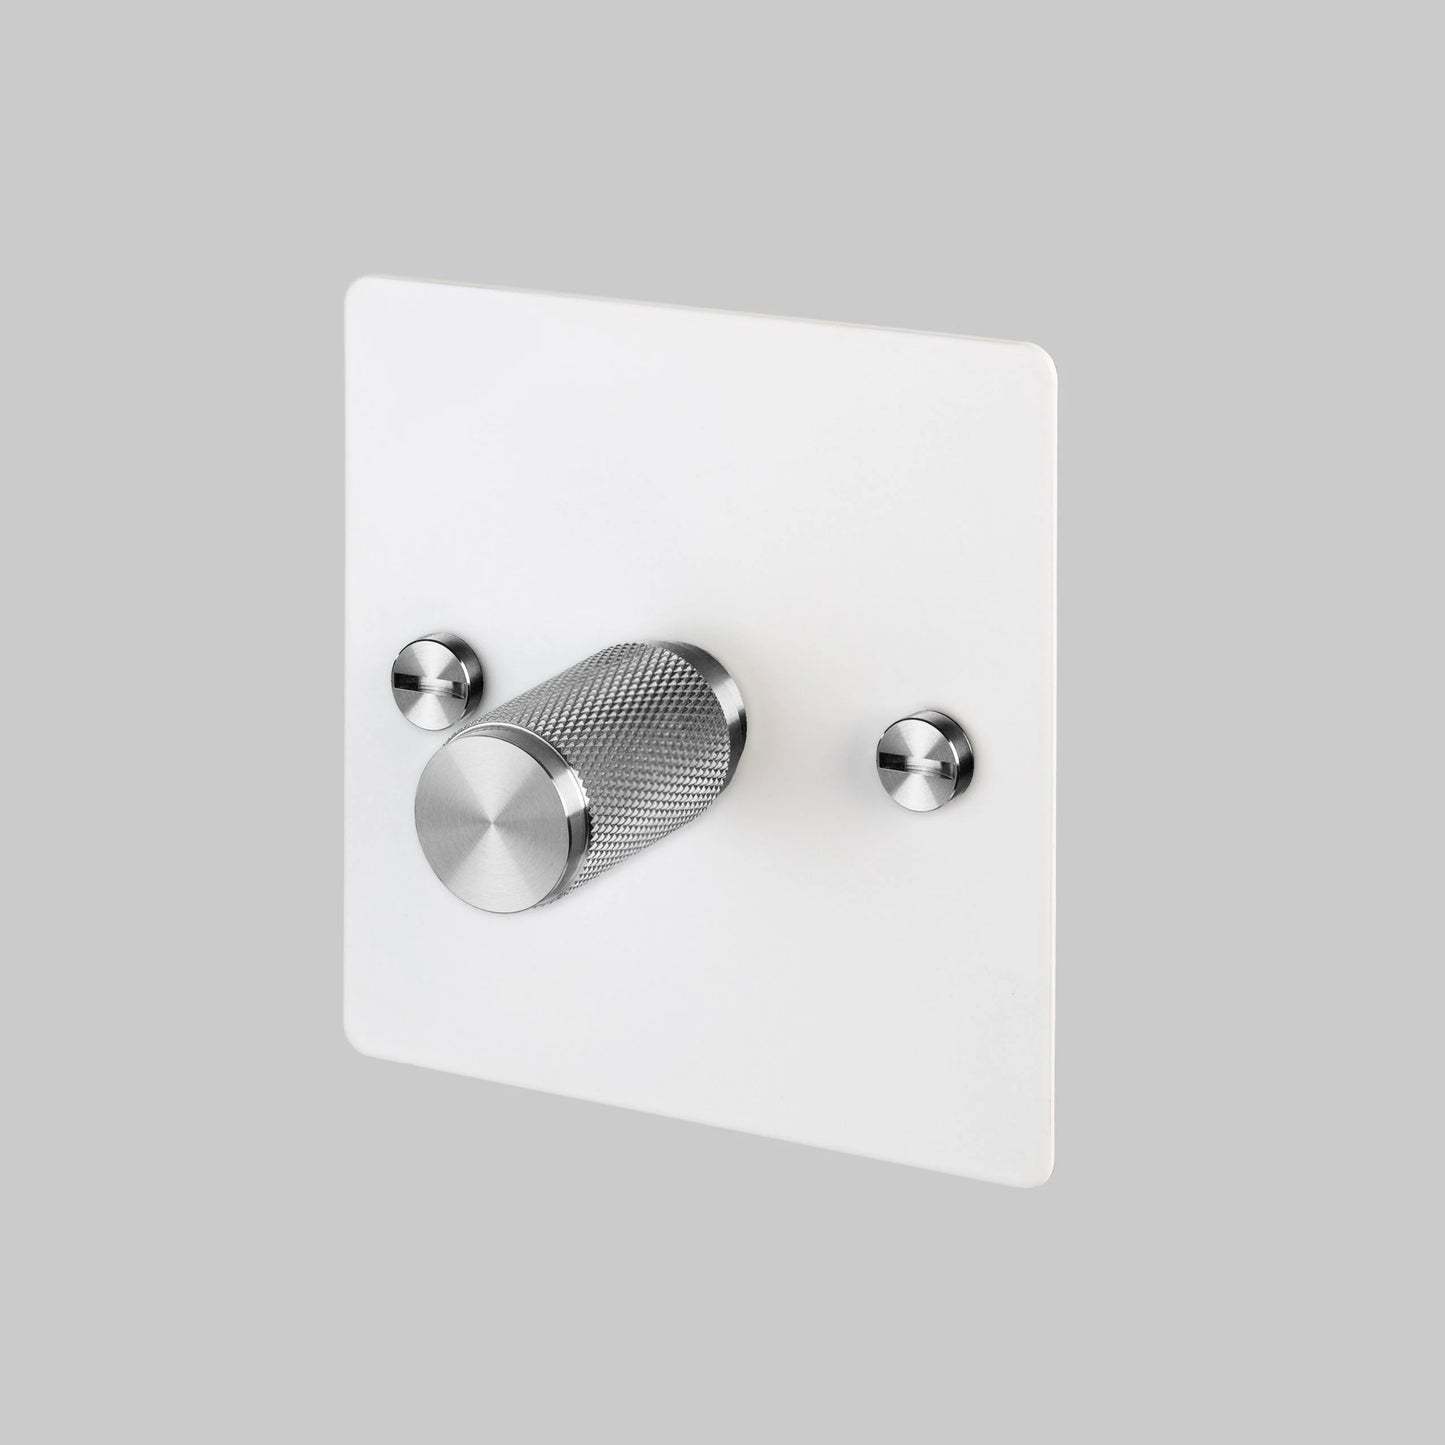 1G Dimmer/ 120W/ White with steel details, angled view.